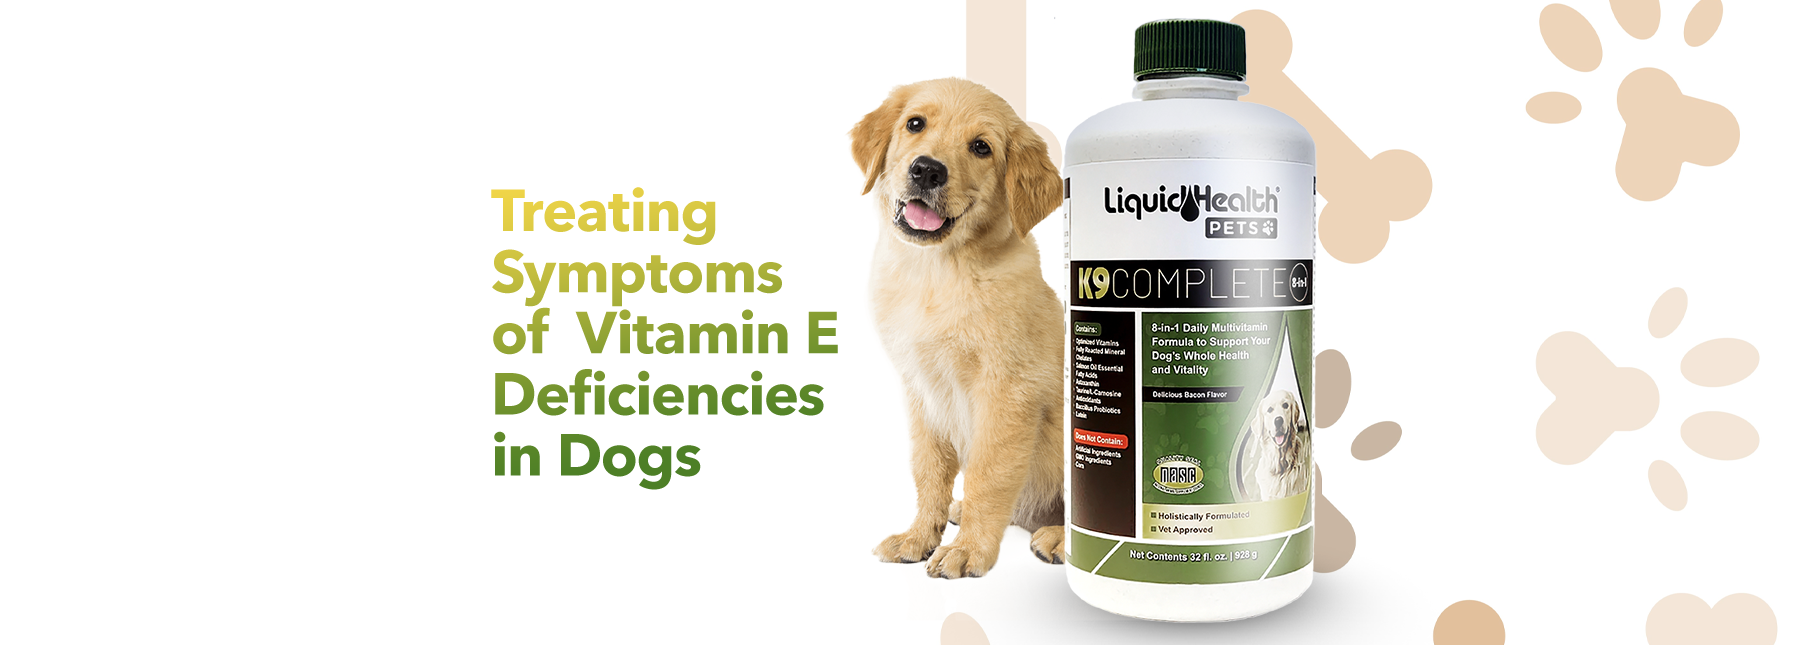 Treating Symptoms of Vitamin E Deficiency in Dogs